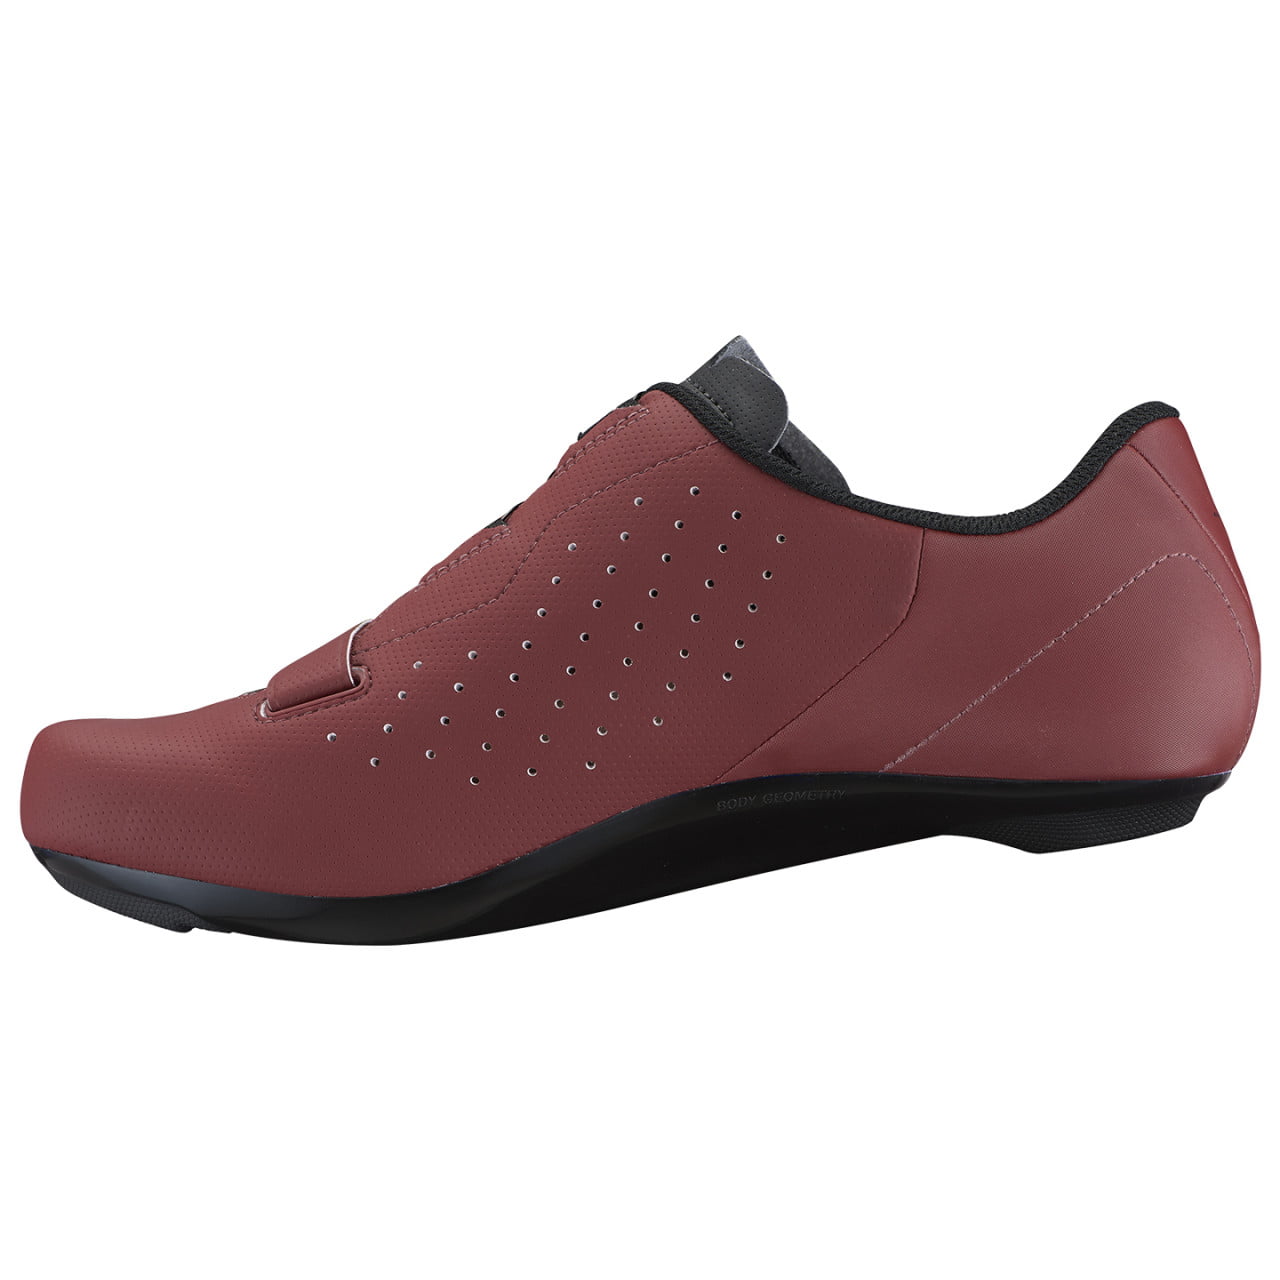 Torch 1.0 Road Bike Shoes